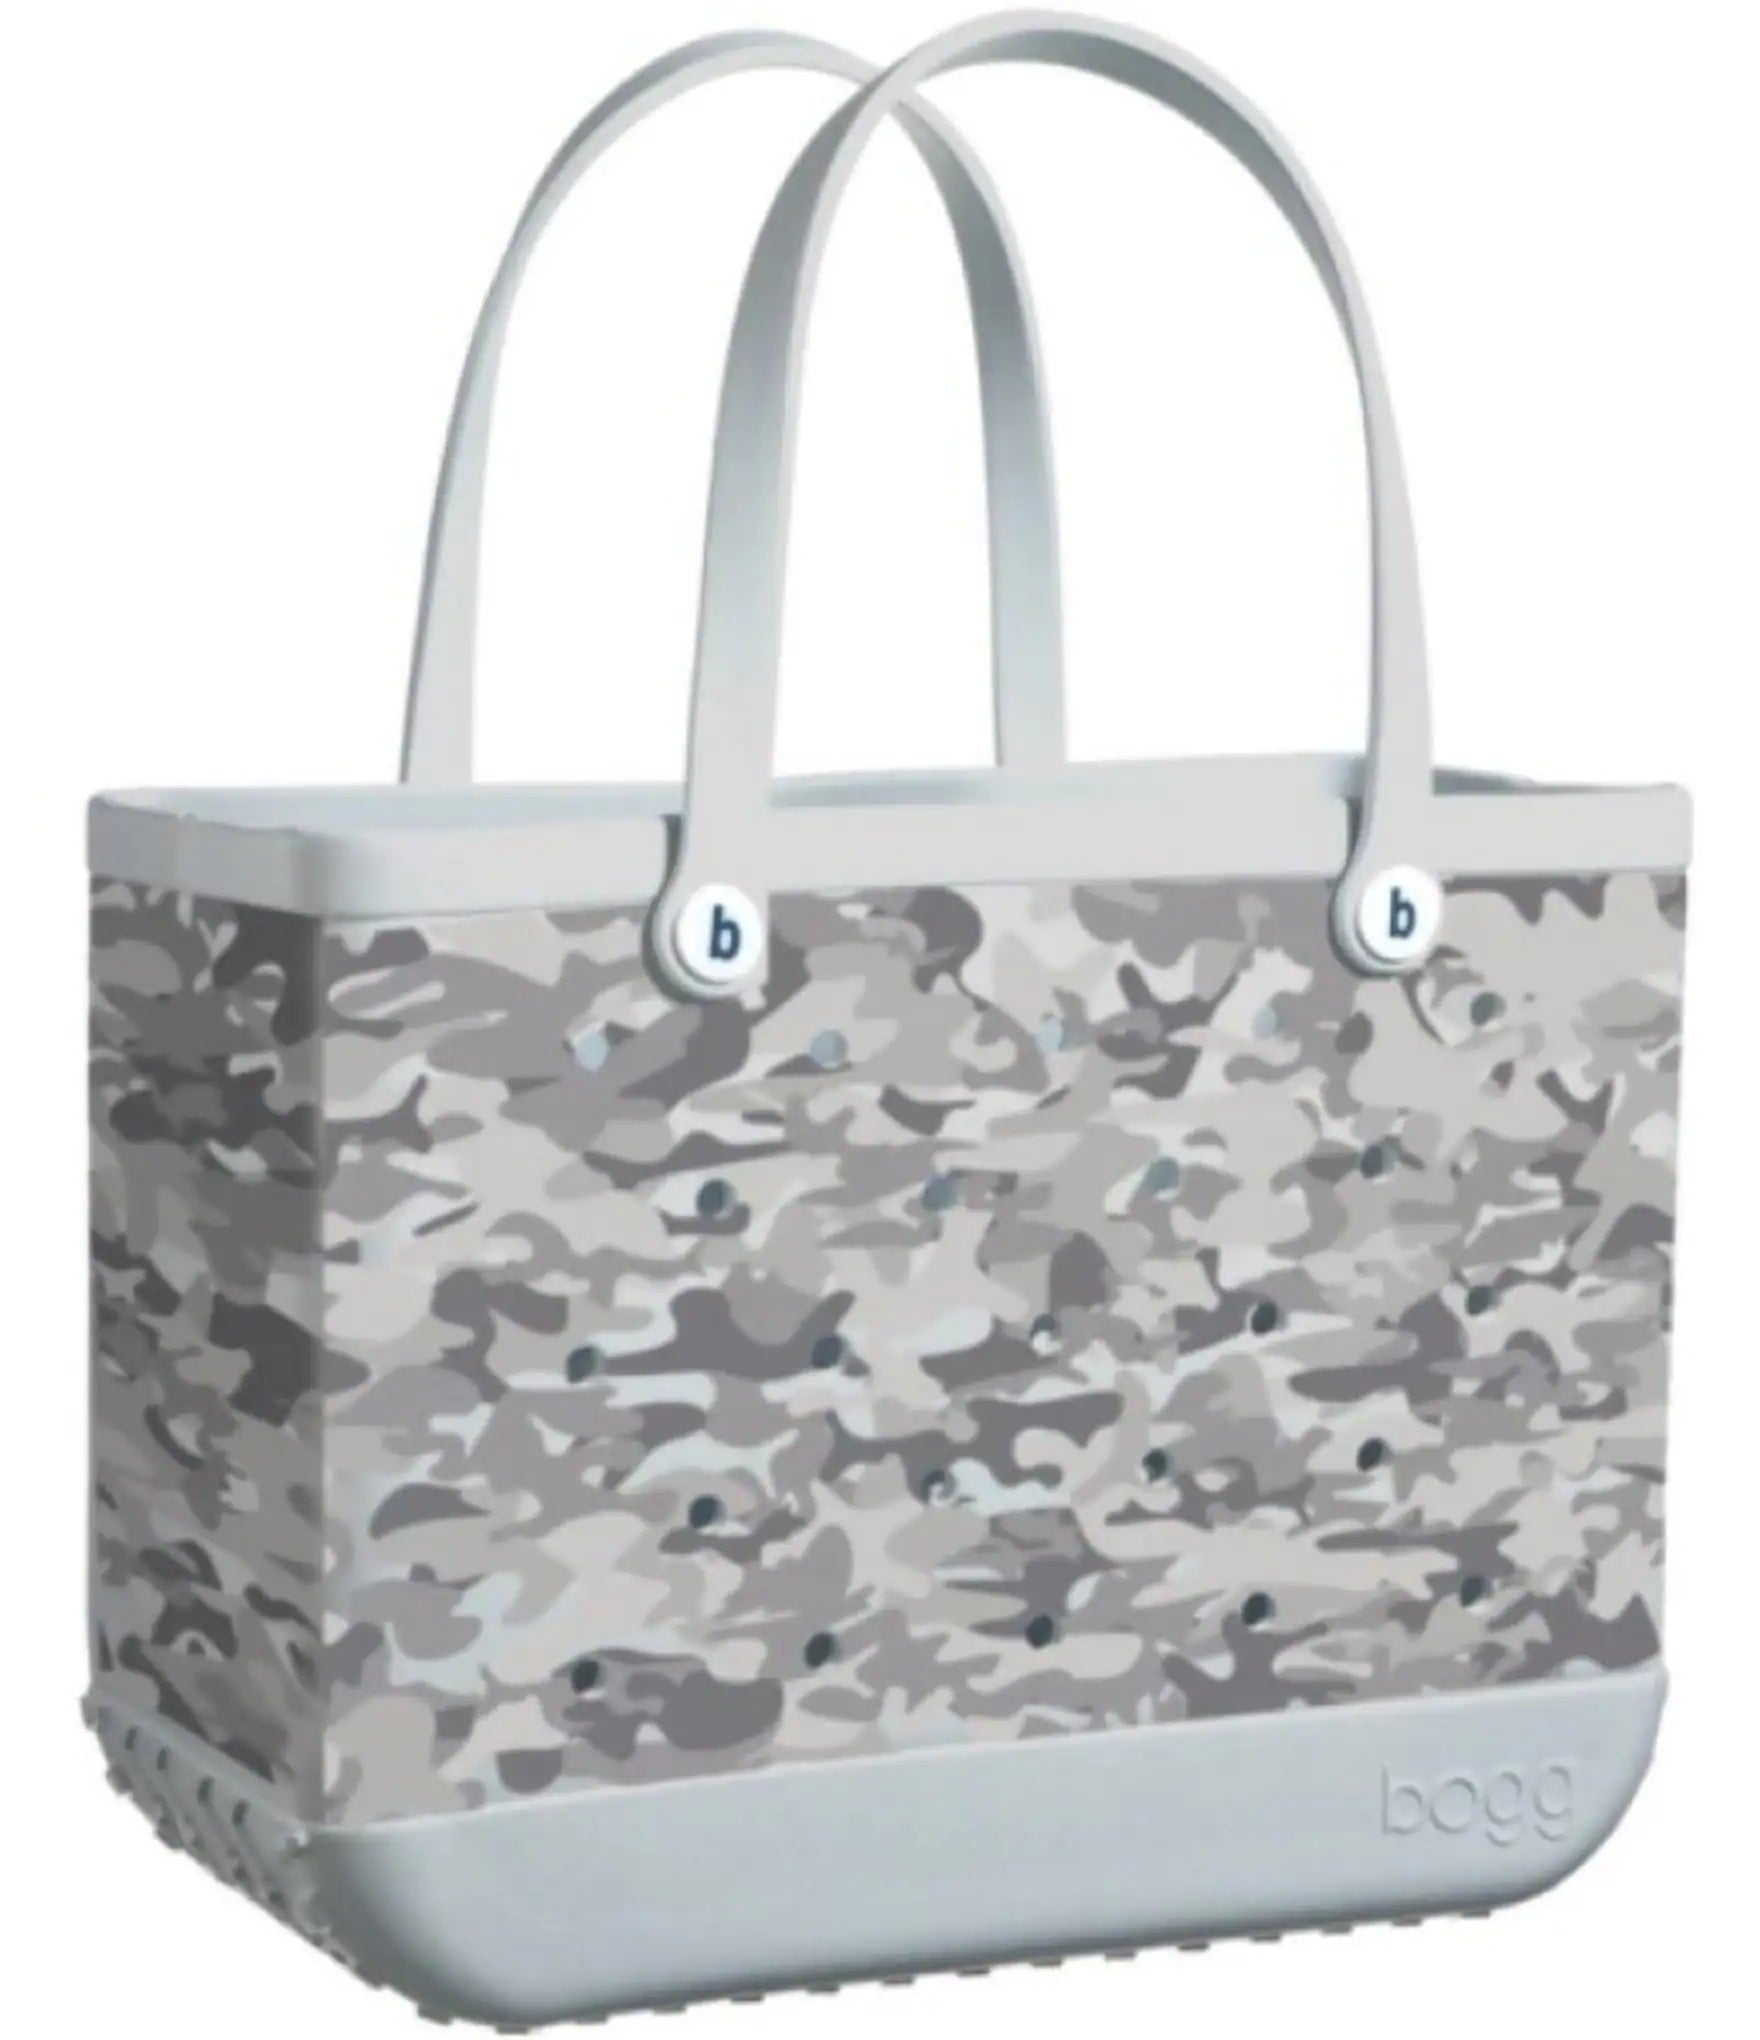 BOGG BAG Anchor Tote Bags for Women